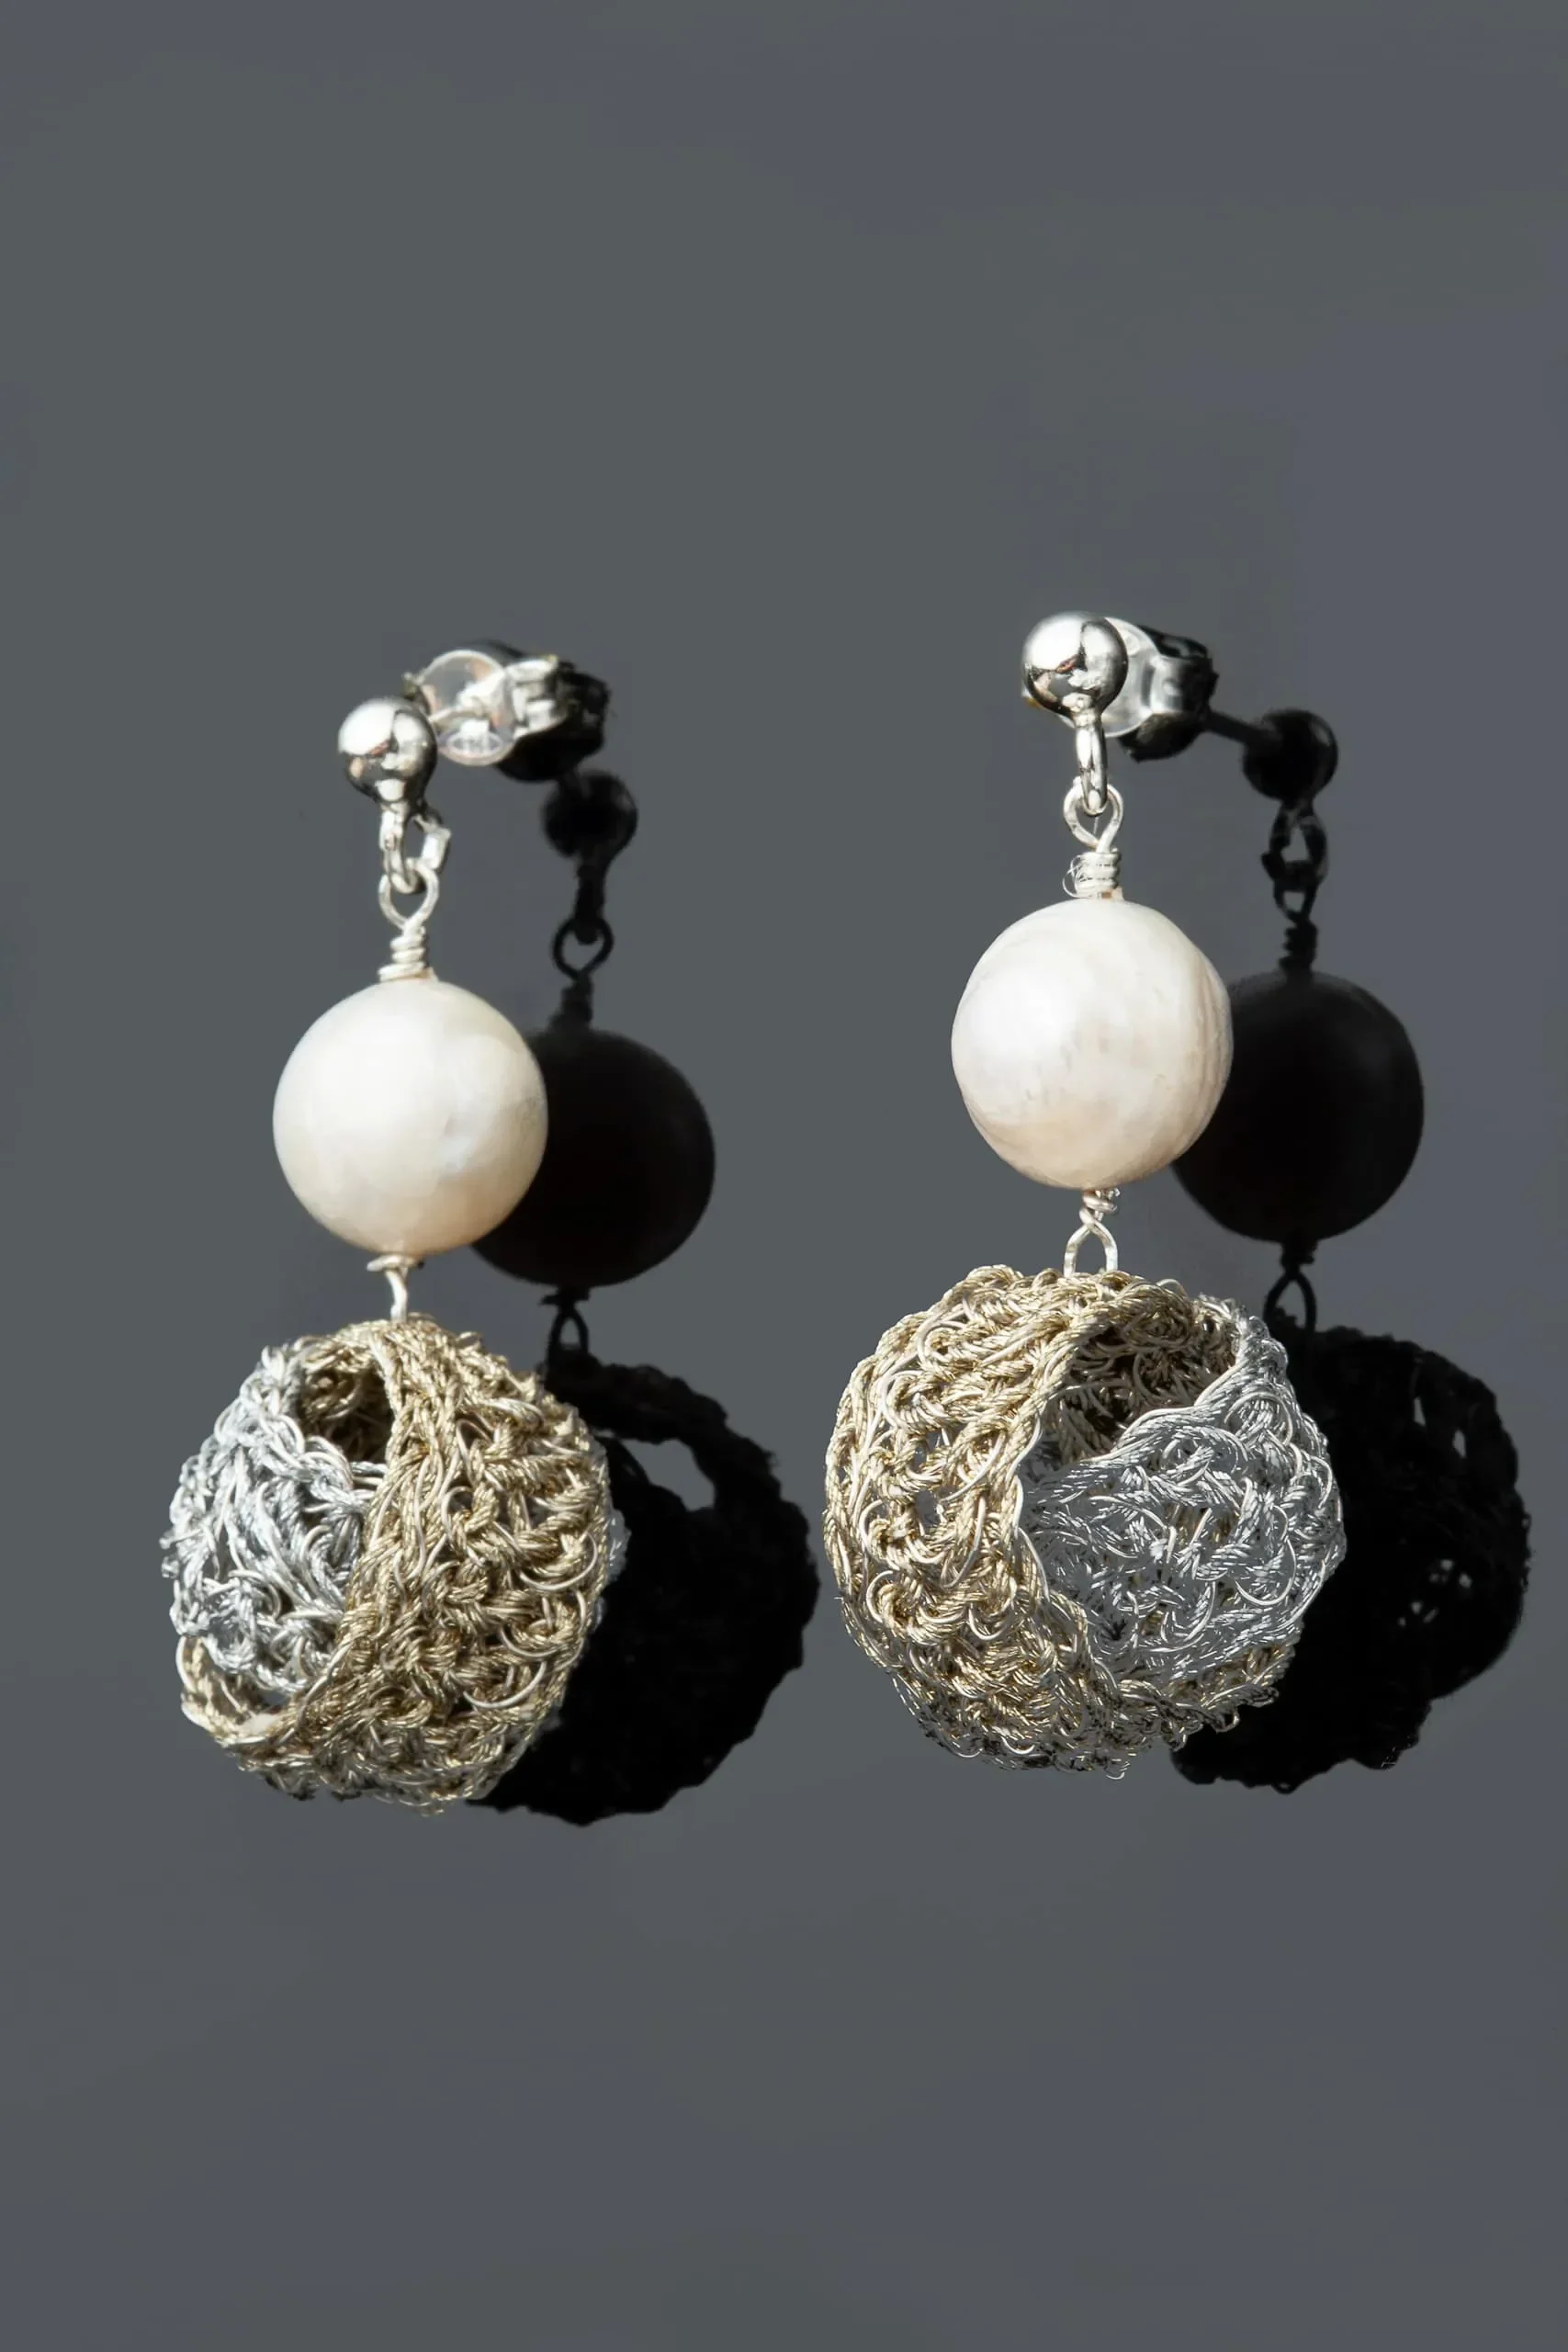 Handmade Jewellery | Crochet knit silver earrings with and pearls gallery 1